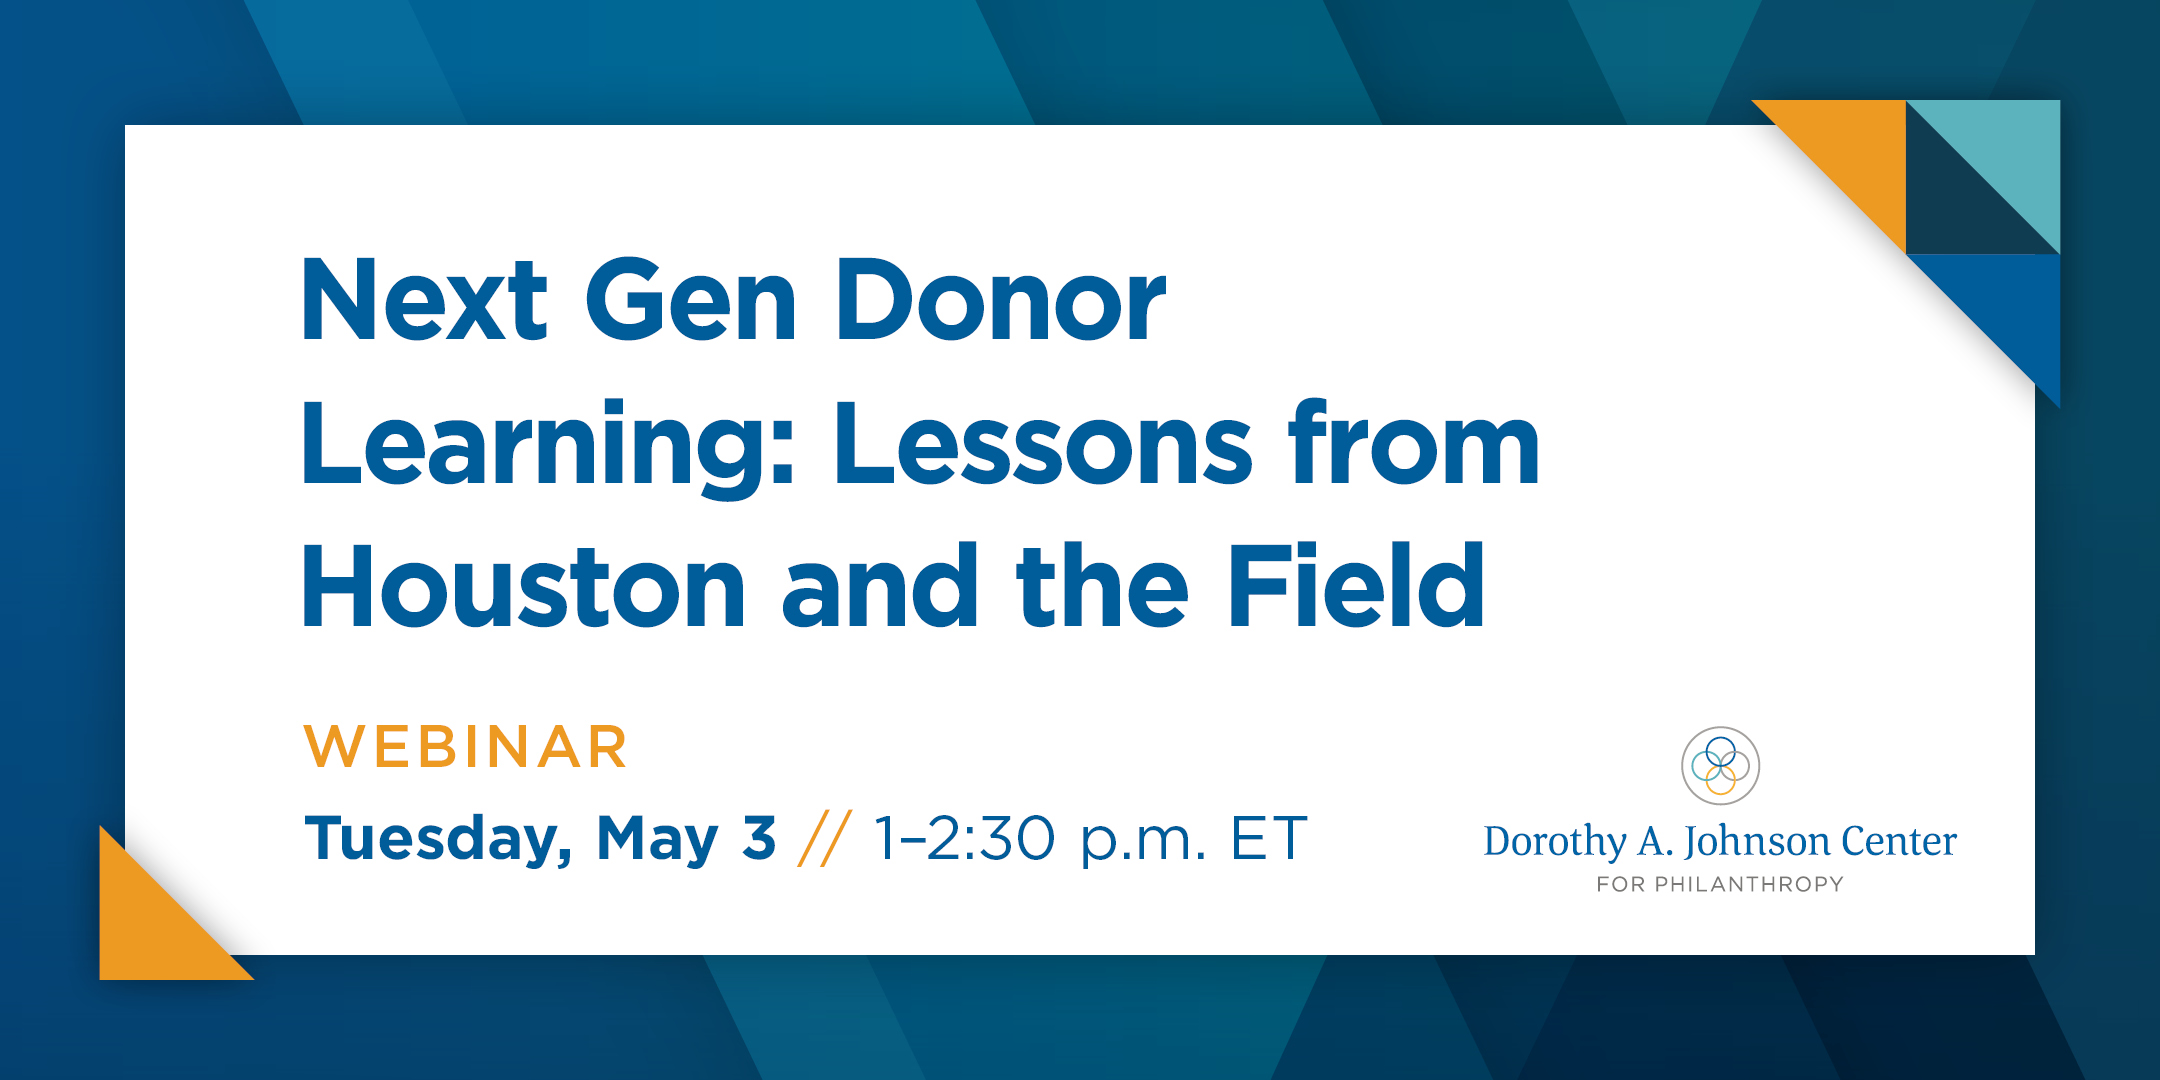 Next Gen Donor Learning: Lessons from Houston and the Field